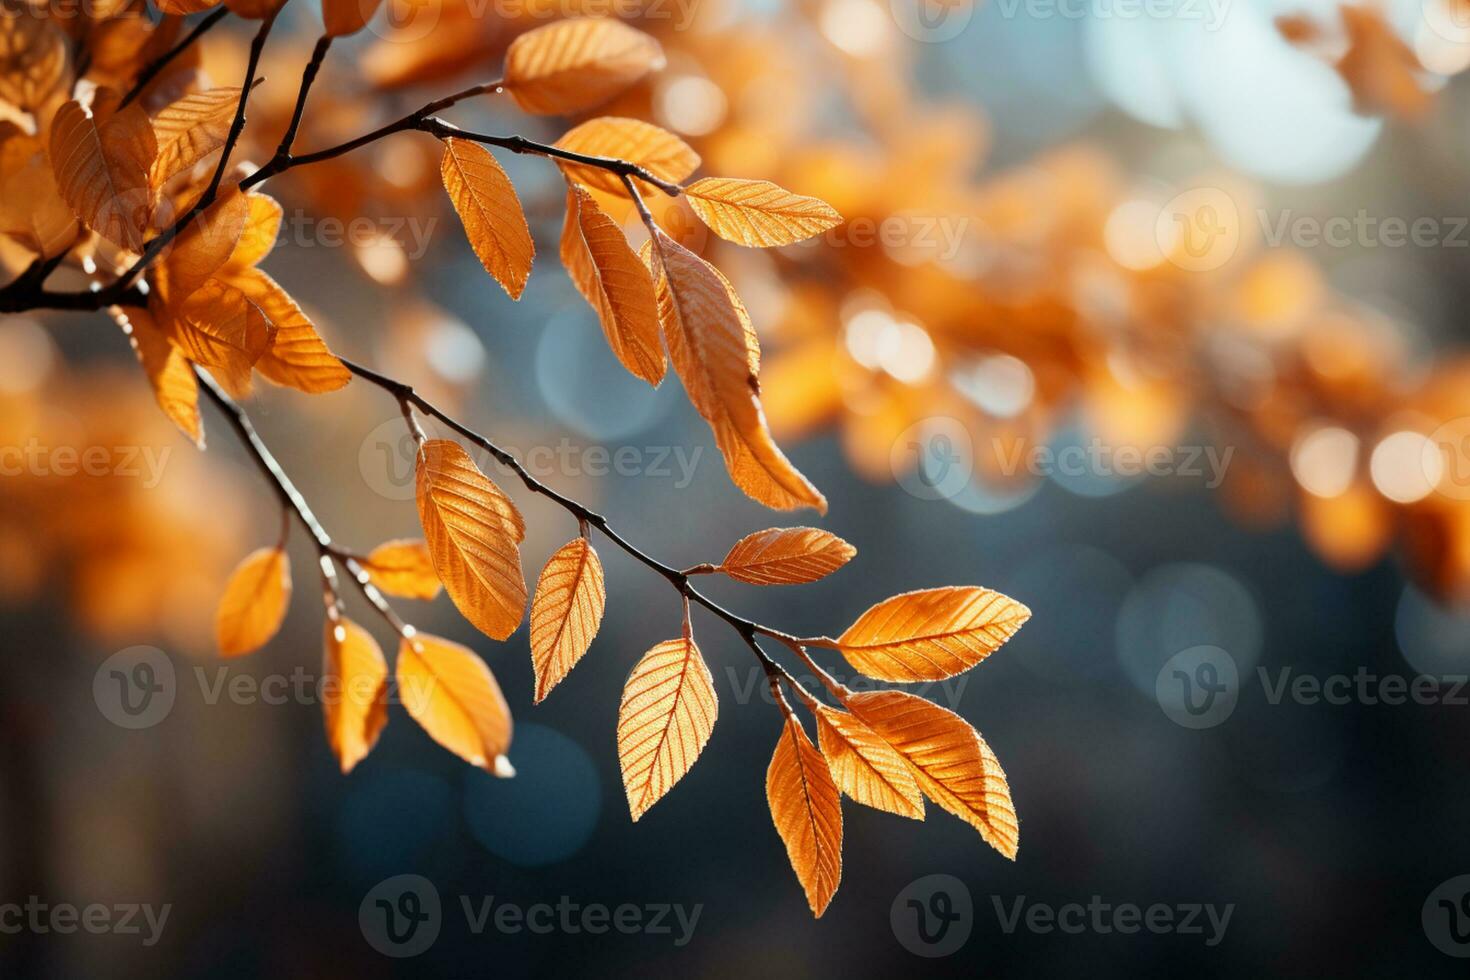 Sun-drenched autumn scene with vibrant yellow leaves on branches AI Generated photo